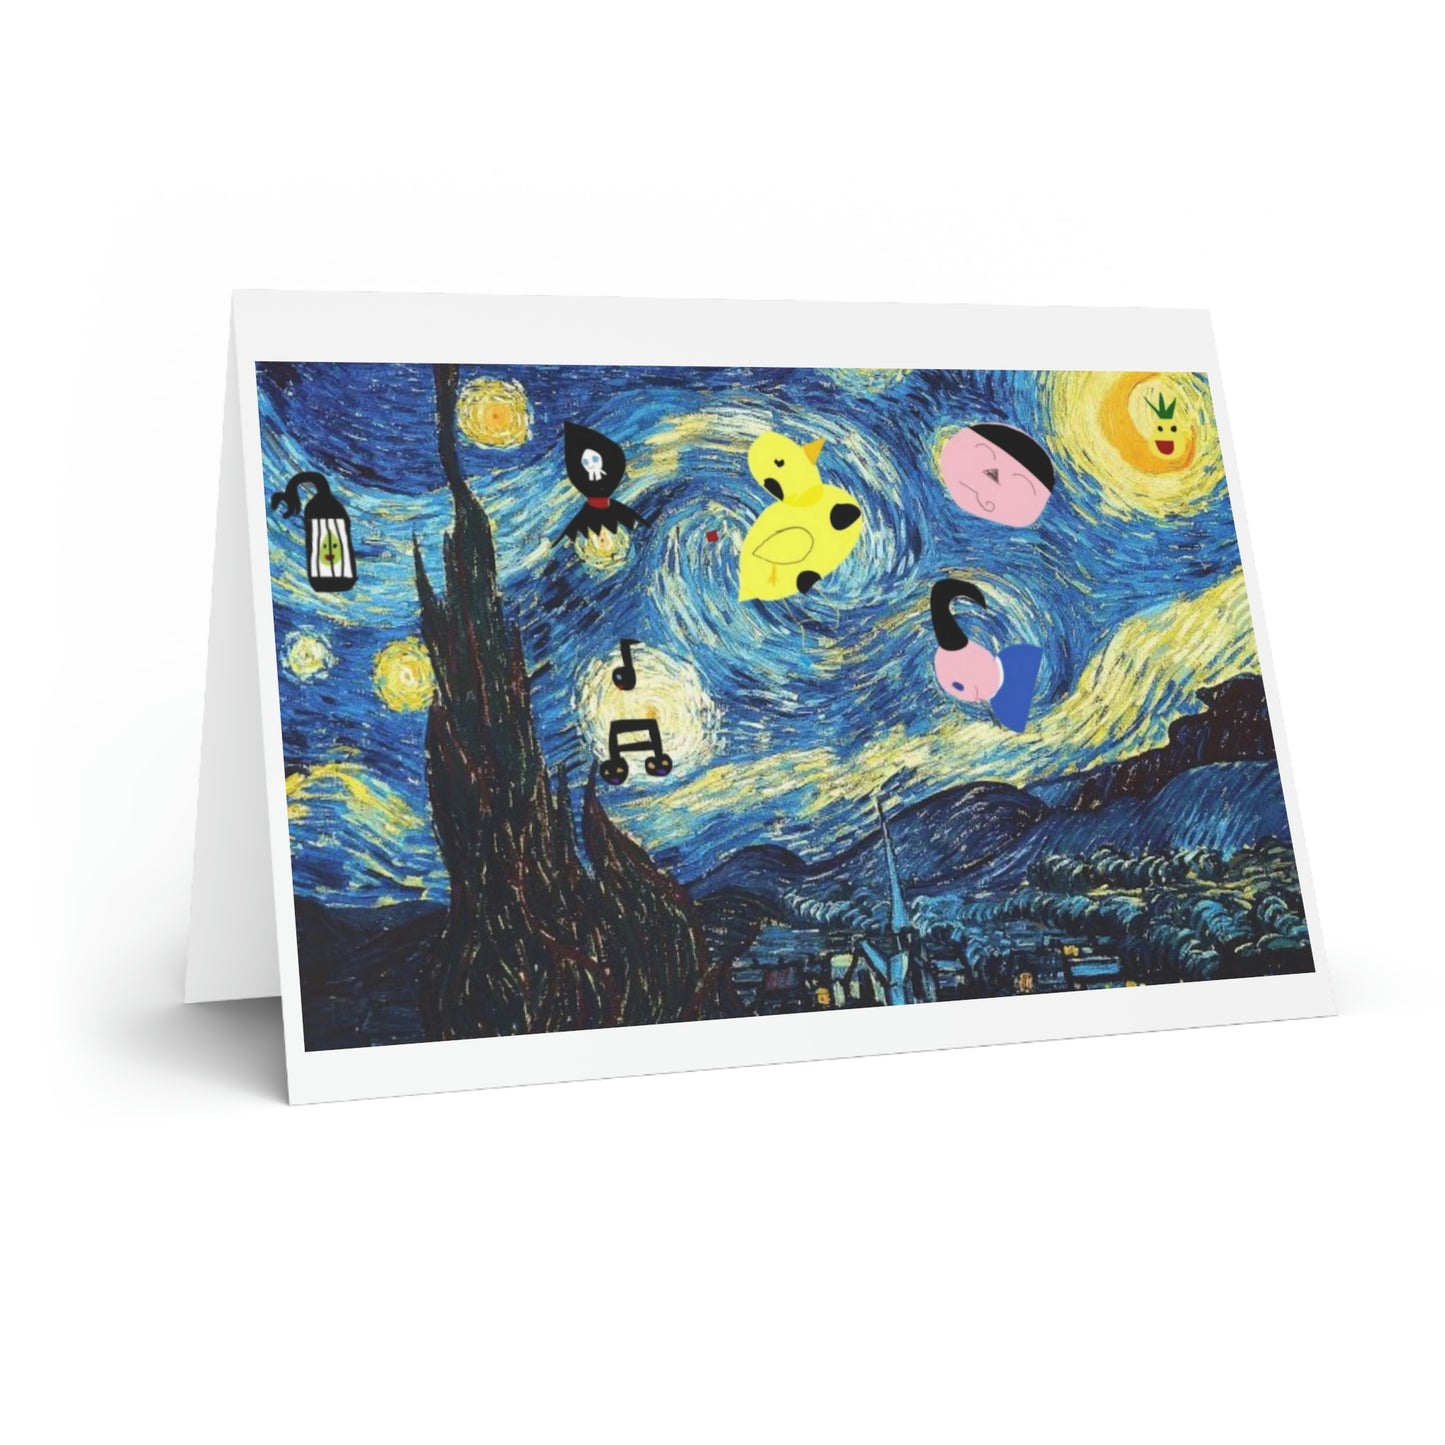 Oddly Starry Nights Blank Folded Greeting Cards